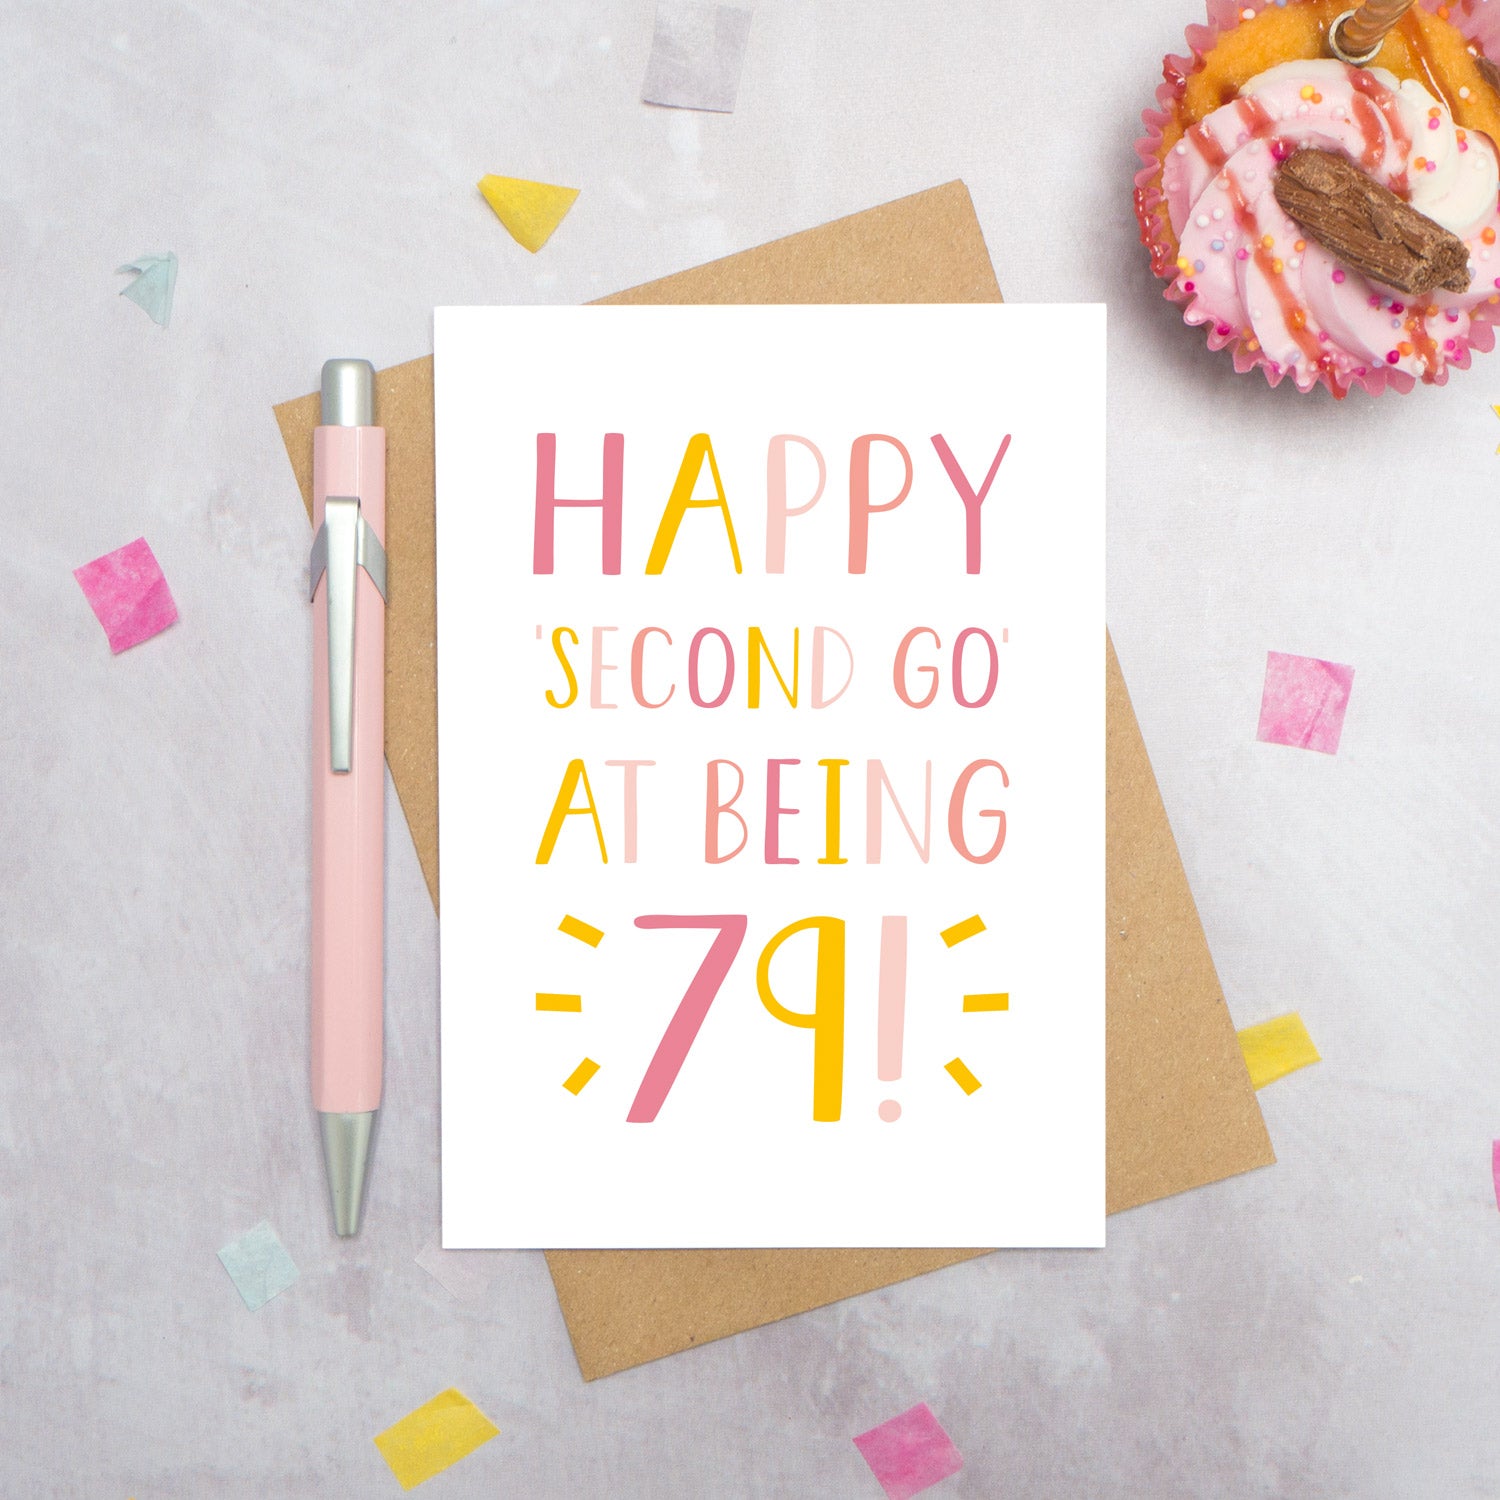 Happy second go at being 79 - milestone age card in pink photographed on a grey background surrounded by a cupcake, pen and confetti.